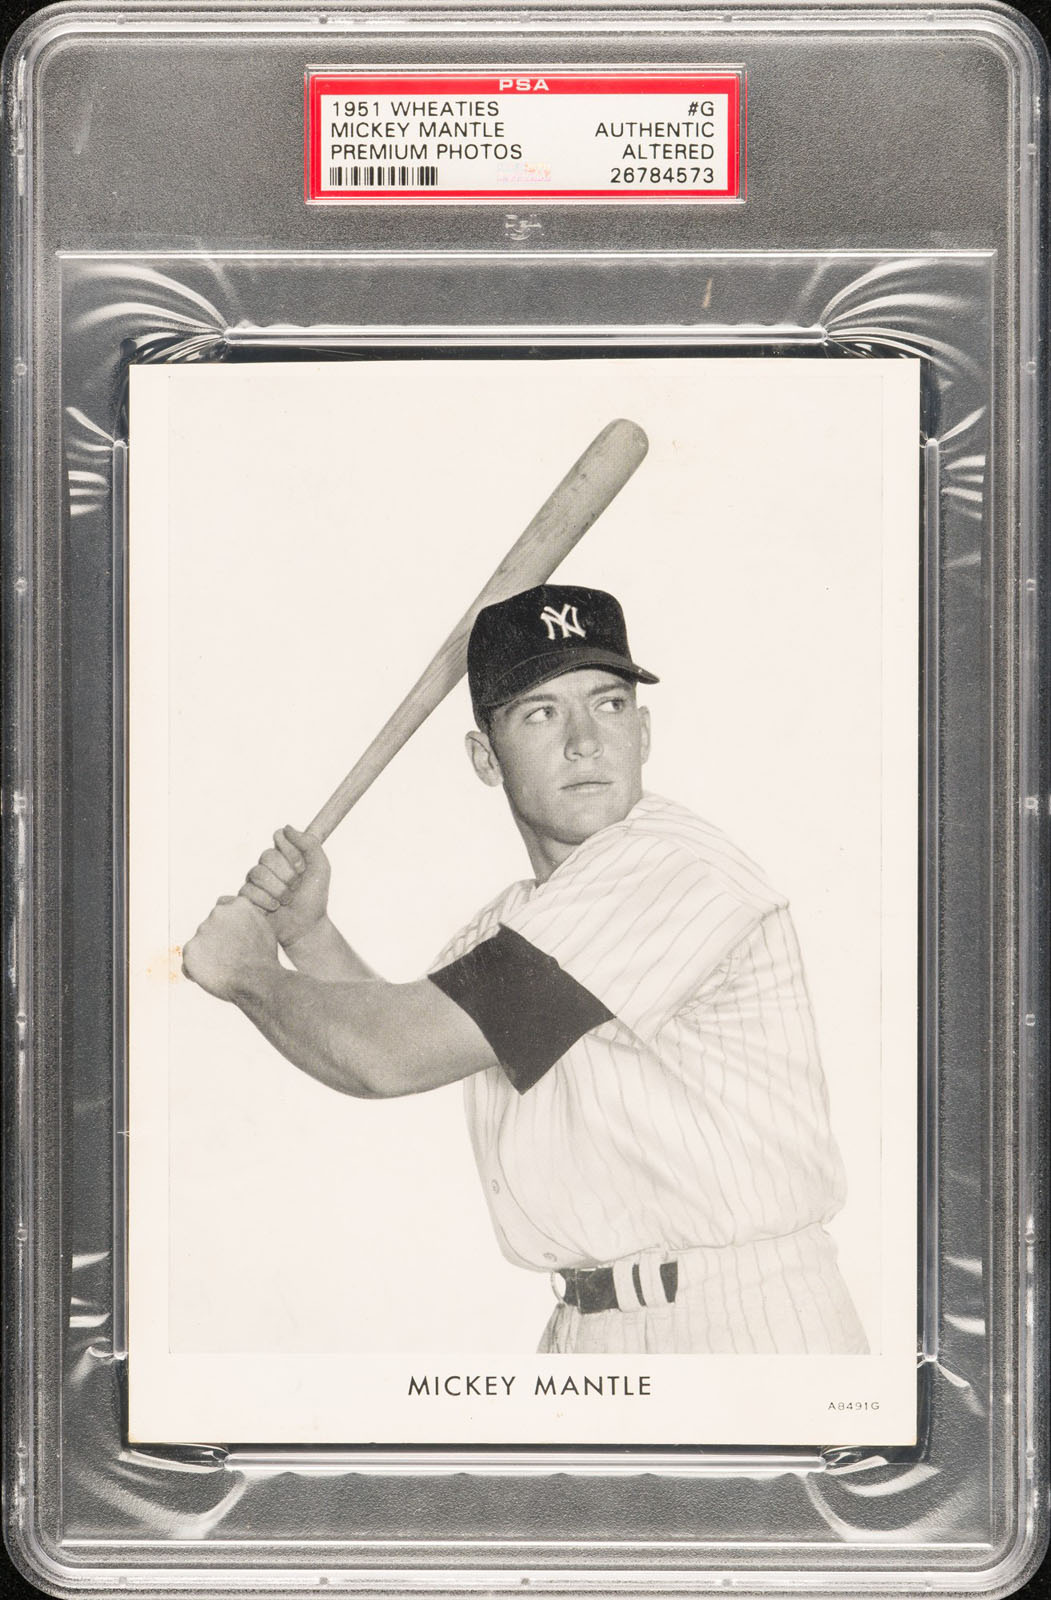 Early 1950s Mickey Mantle Bat, Jersey to Auction